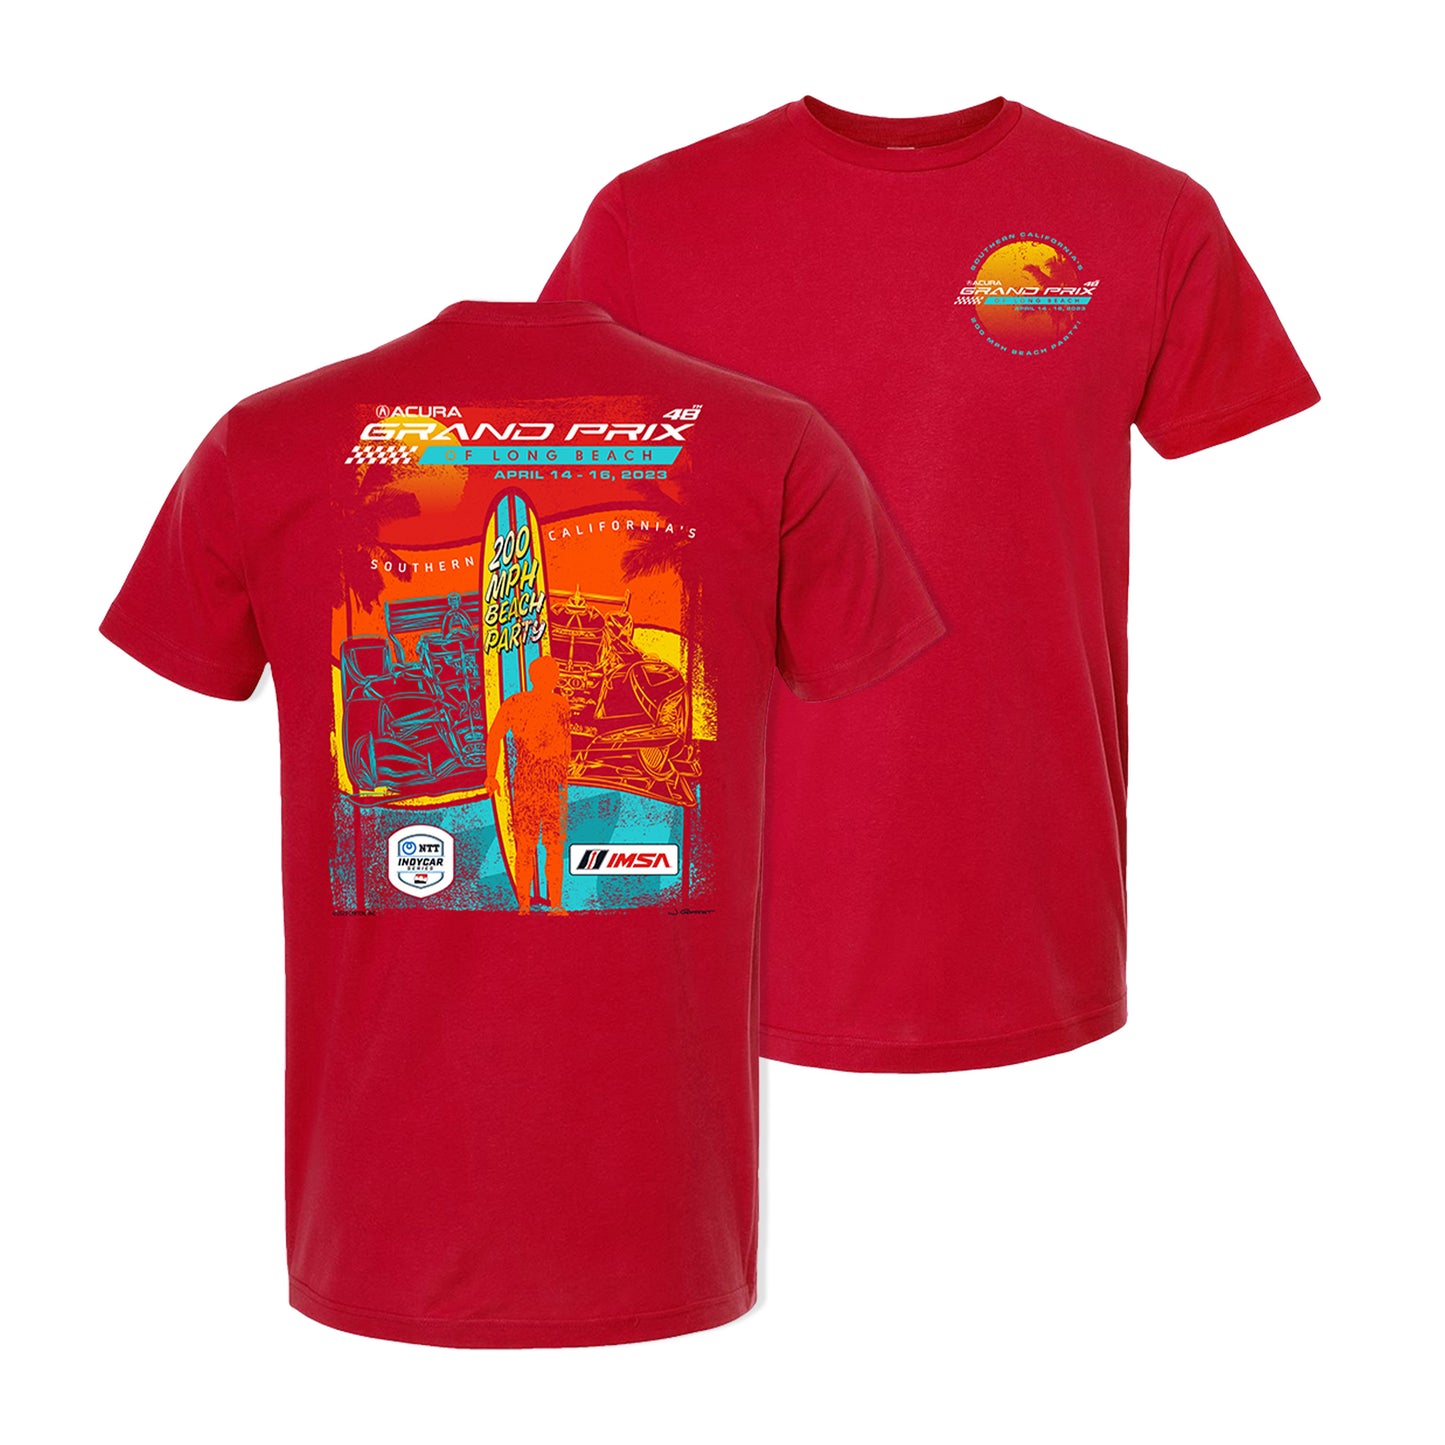 2023 Acura Grand Prix of Long Beach Surfer Tee - Red